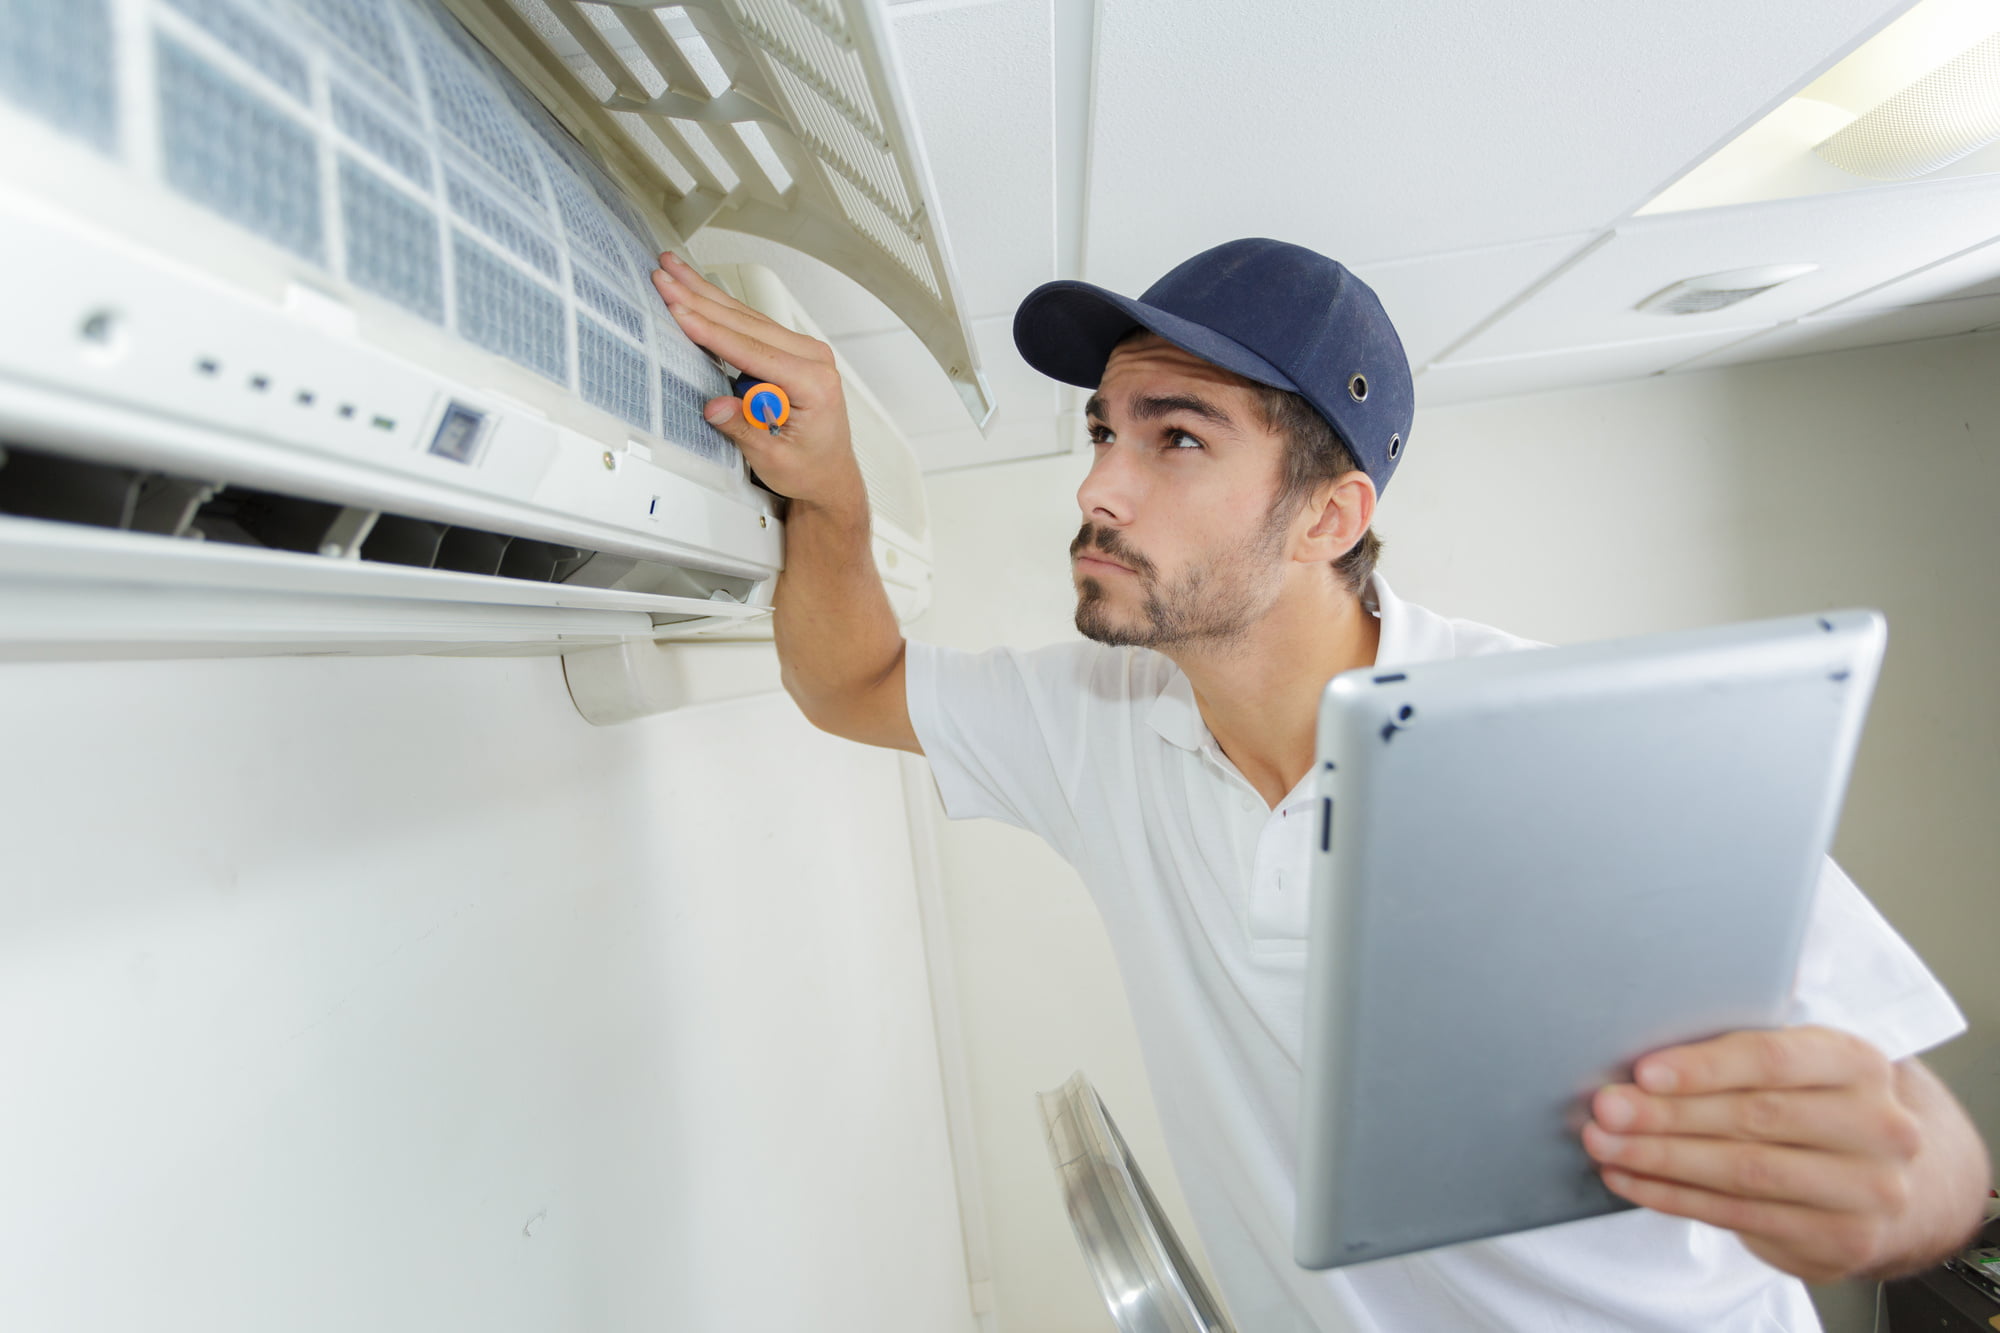 When it comes to HVAC services, there are a few things you should expect from hiring a professional company. Read about them here in this brief overview.